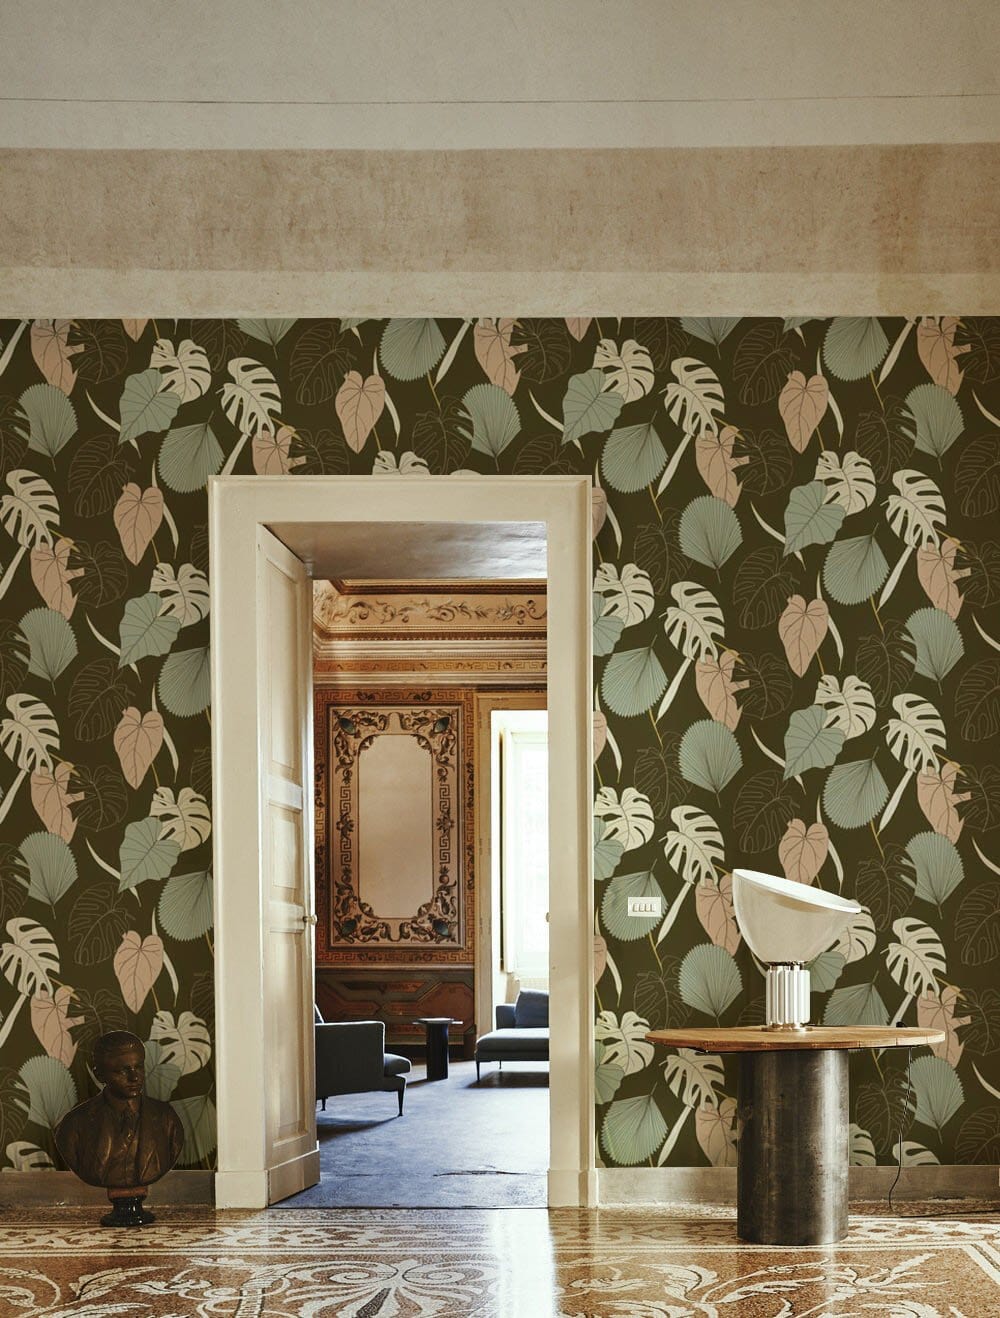 Wallpaper mural with many leaves for hallway decoration